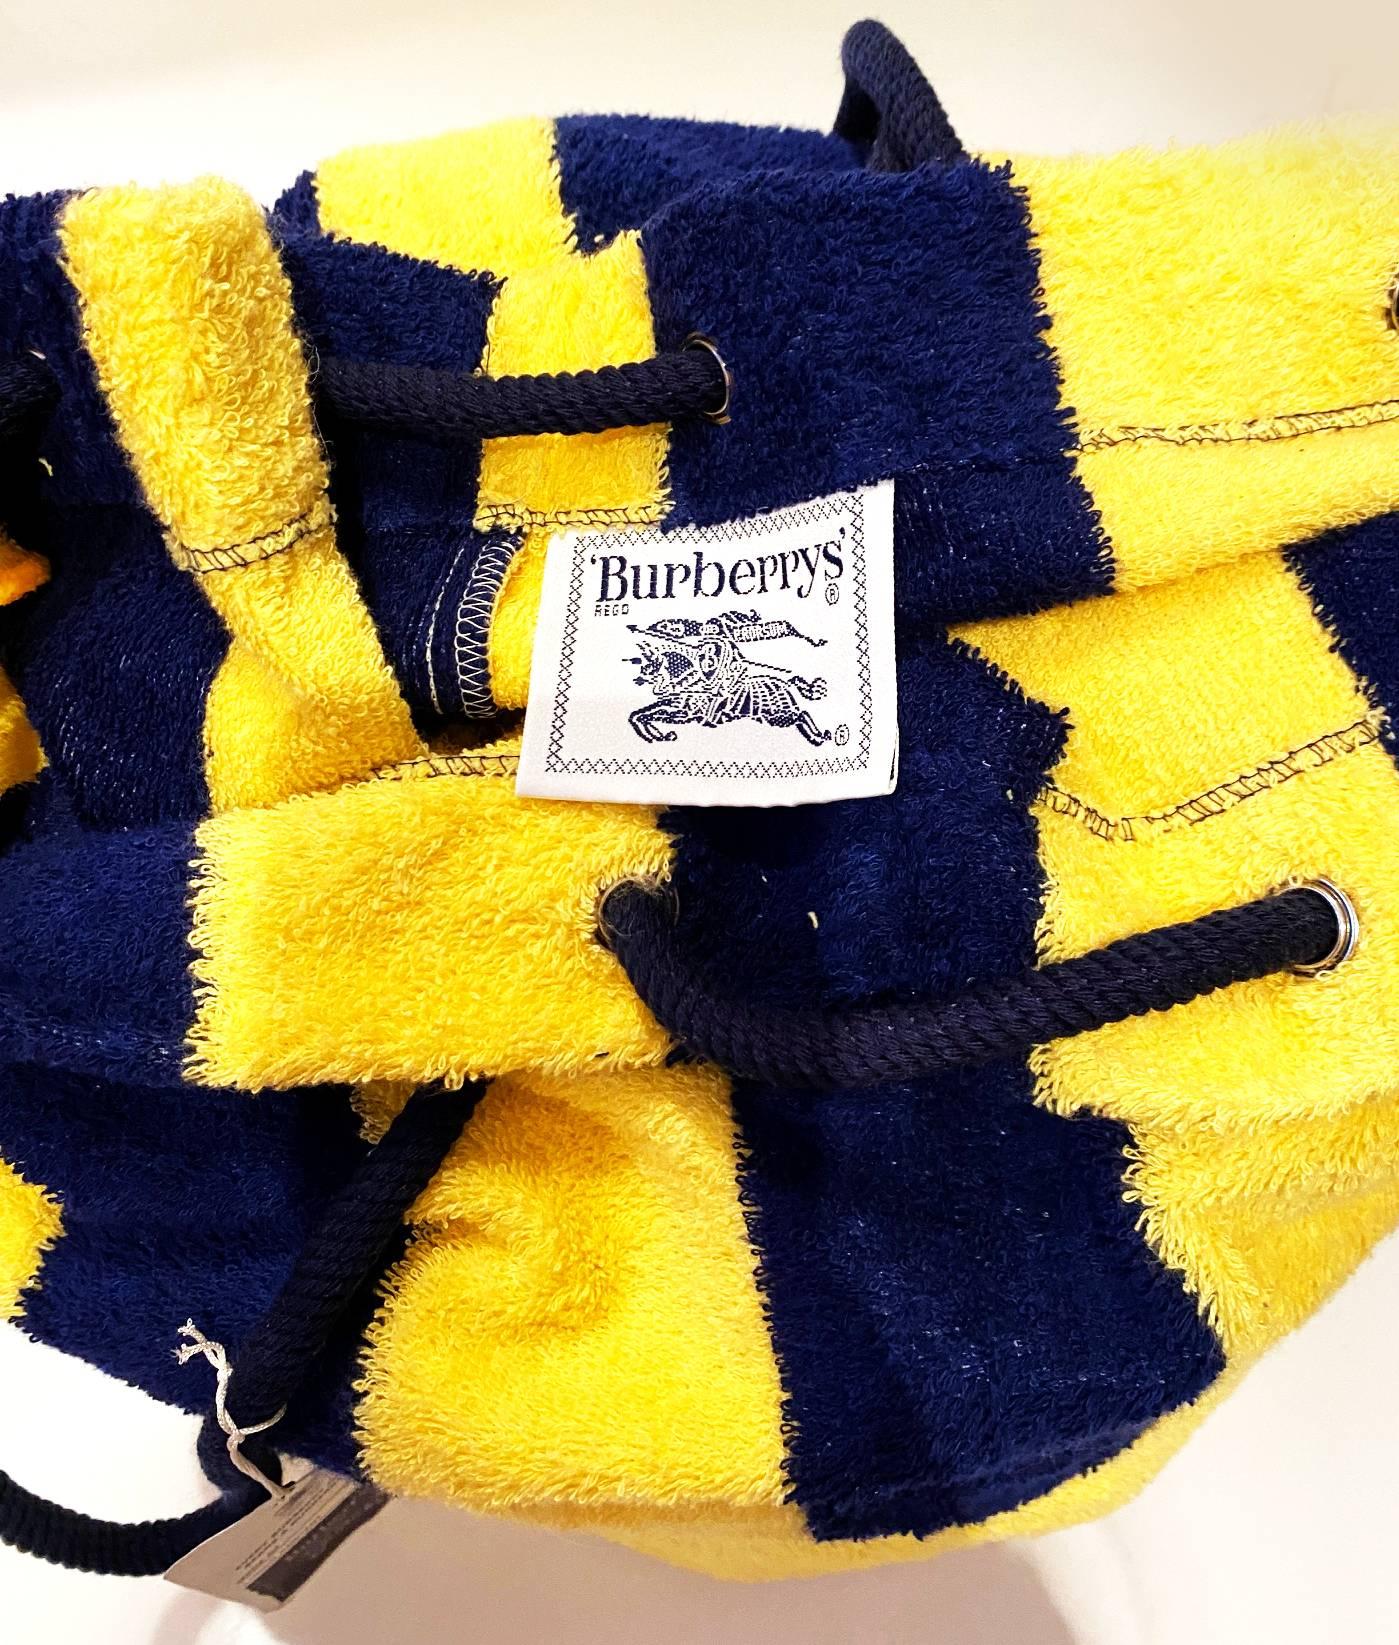 1980s Burberry's Toweling Beach Duffle Bag In Excellent Condition For Sale In London, GB